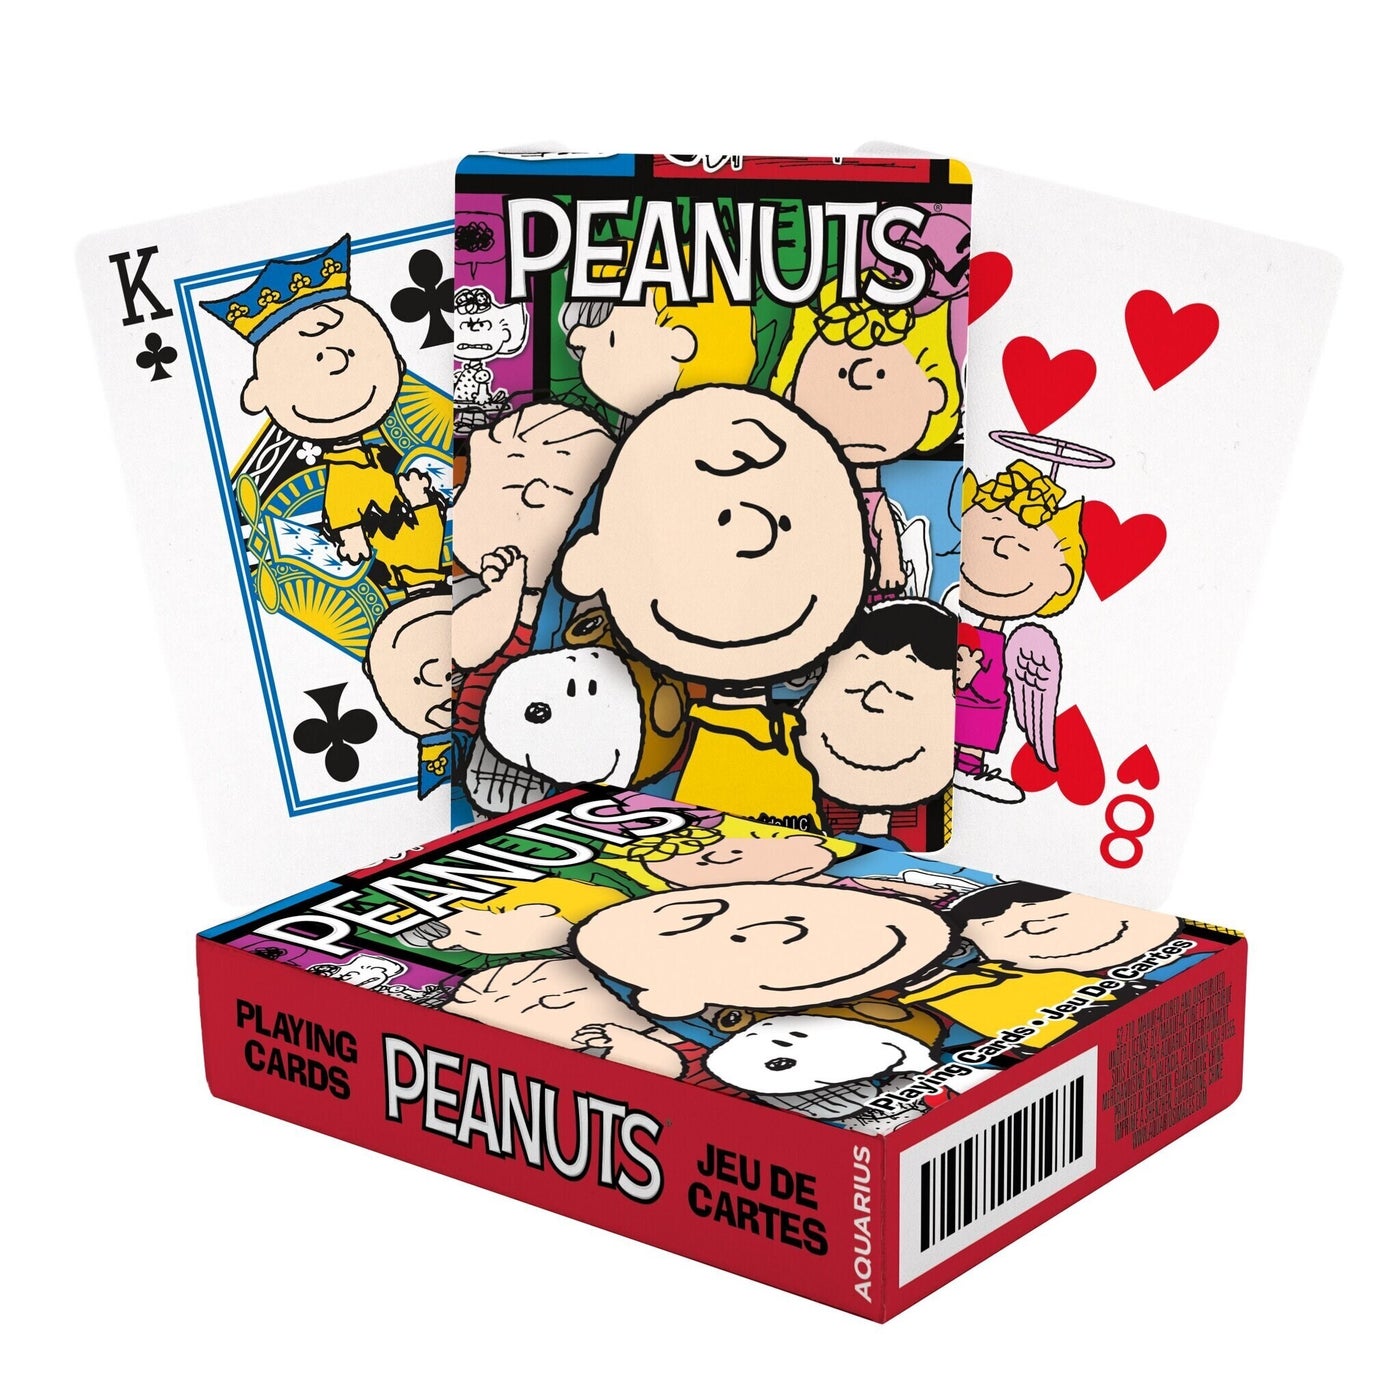 peanuts cast playing cards fanned out behind the box on a white background